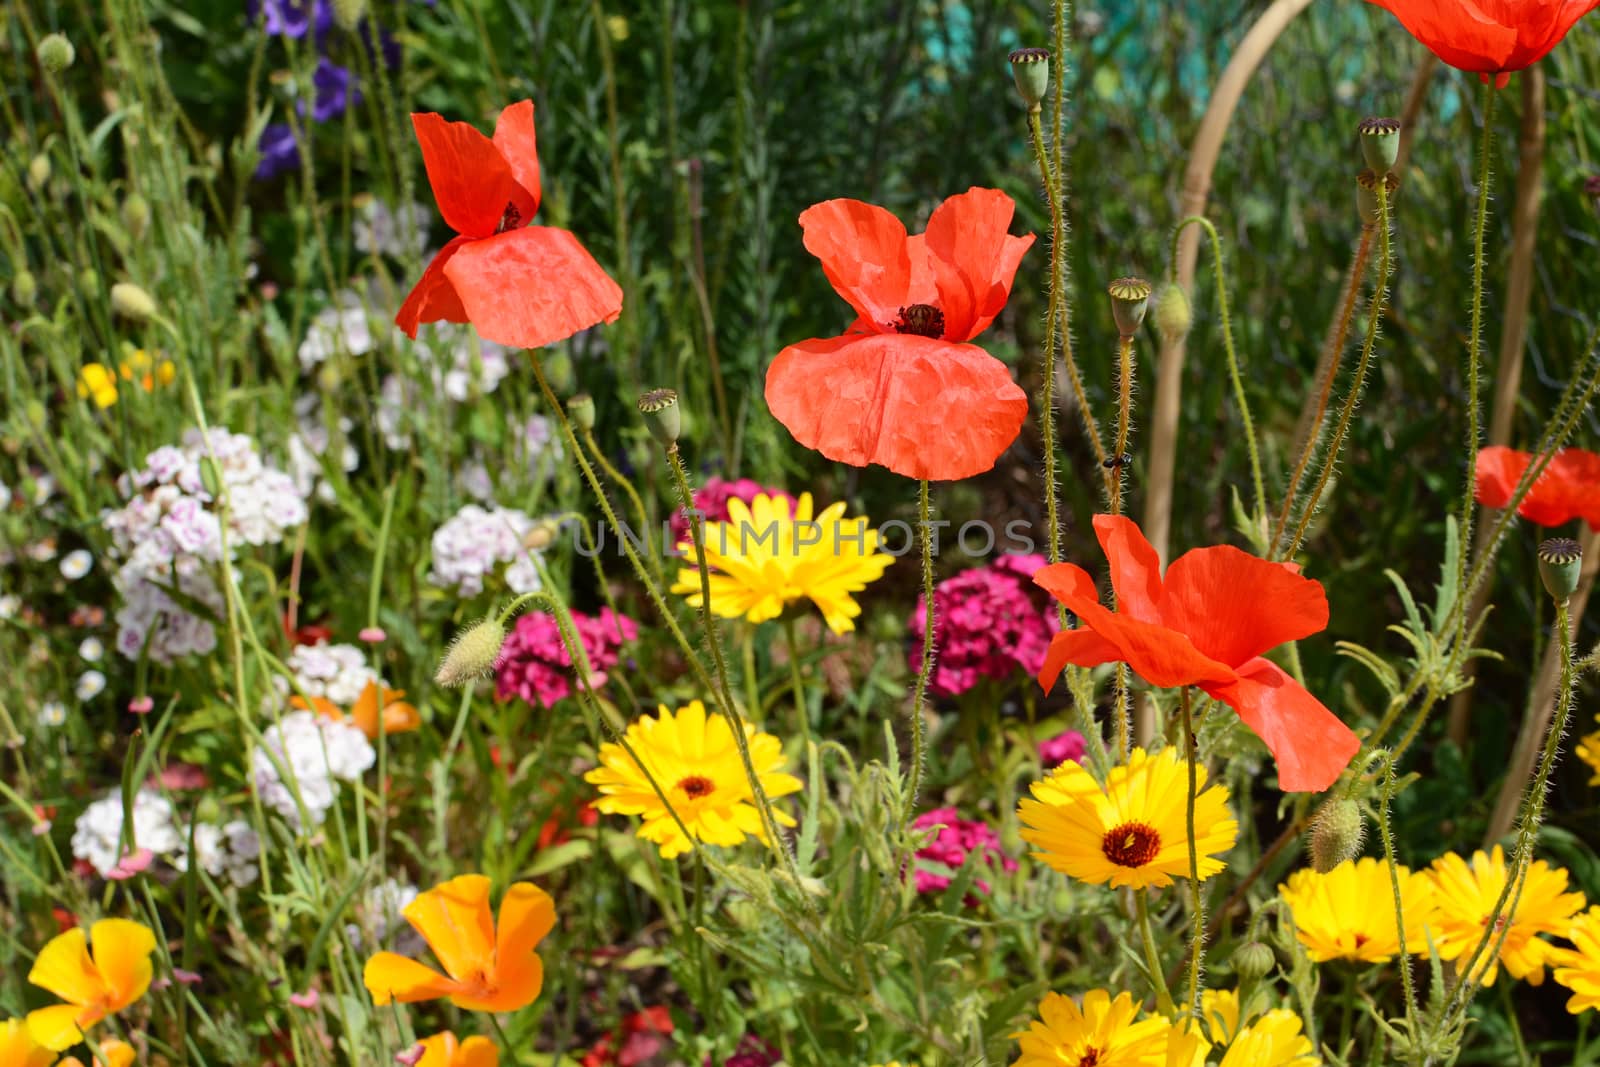 Red common poppies, yellow calendula and Sweet William flowers grow together in a sunny garden